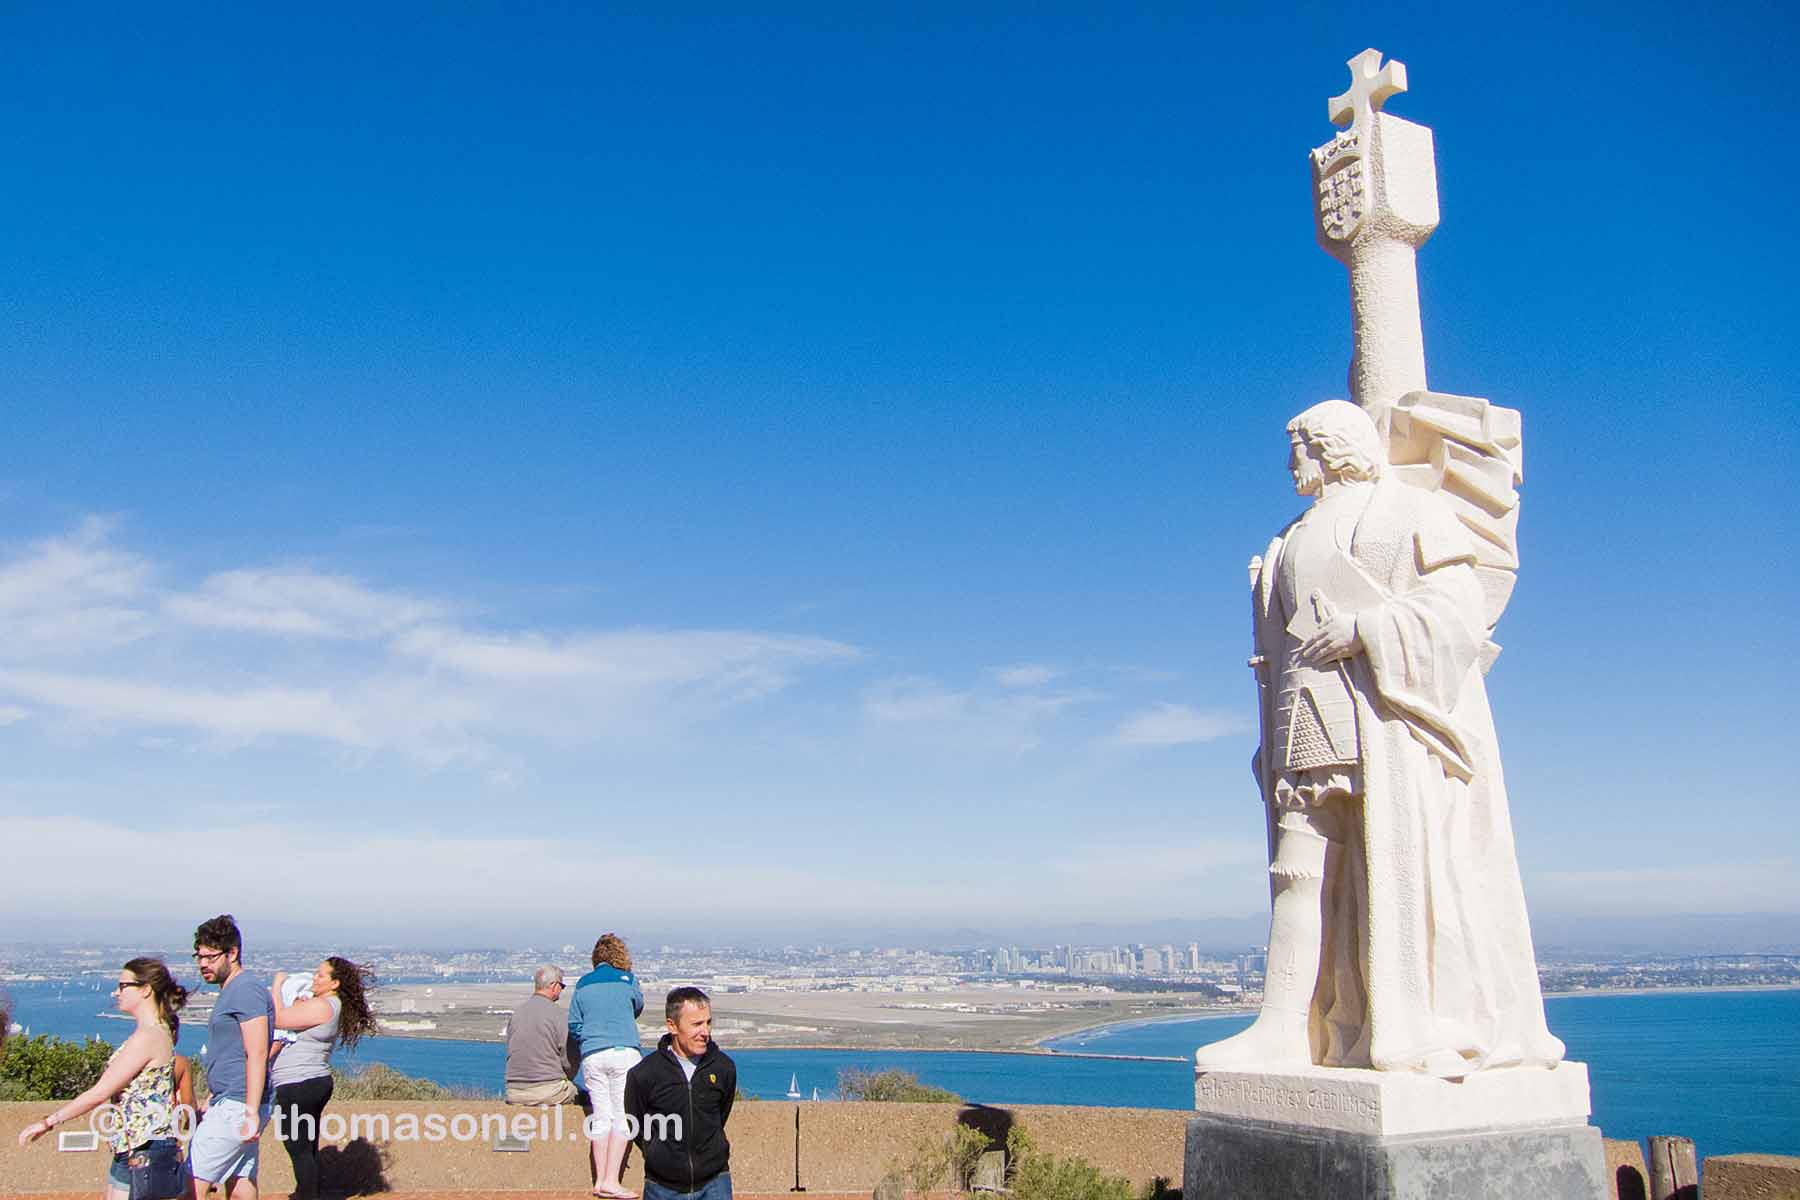 Cabrillo National Monument overlooking San Diego Bay.  Click for next photo.